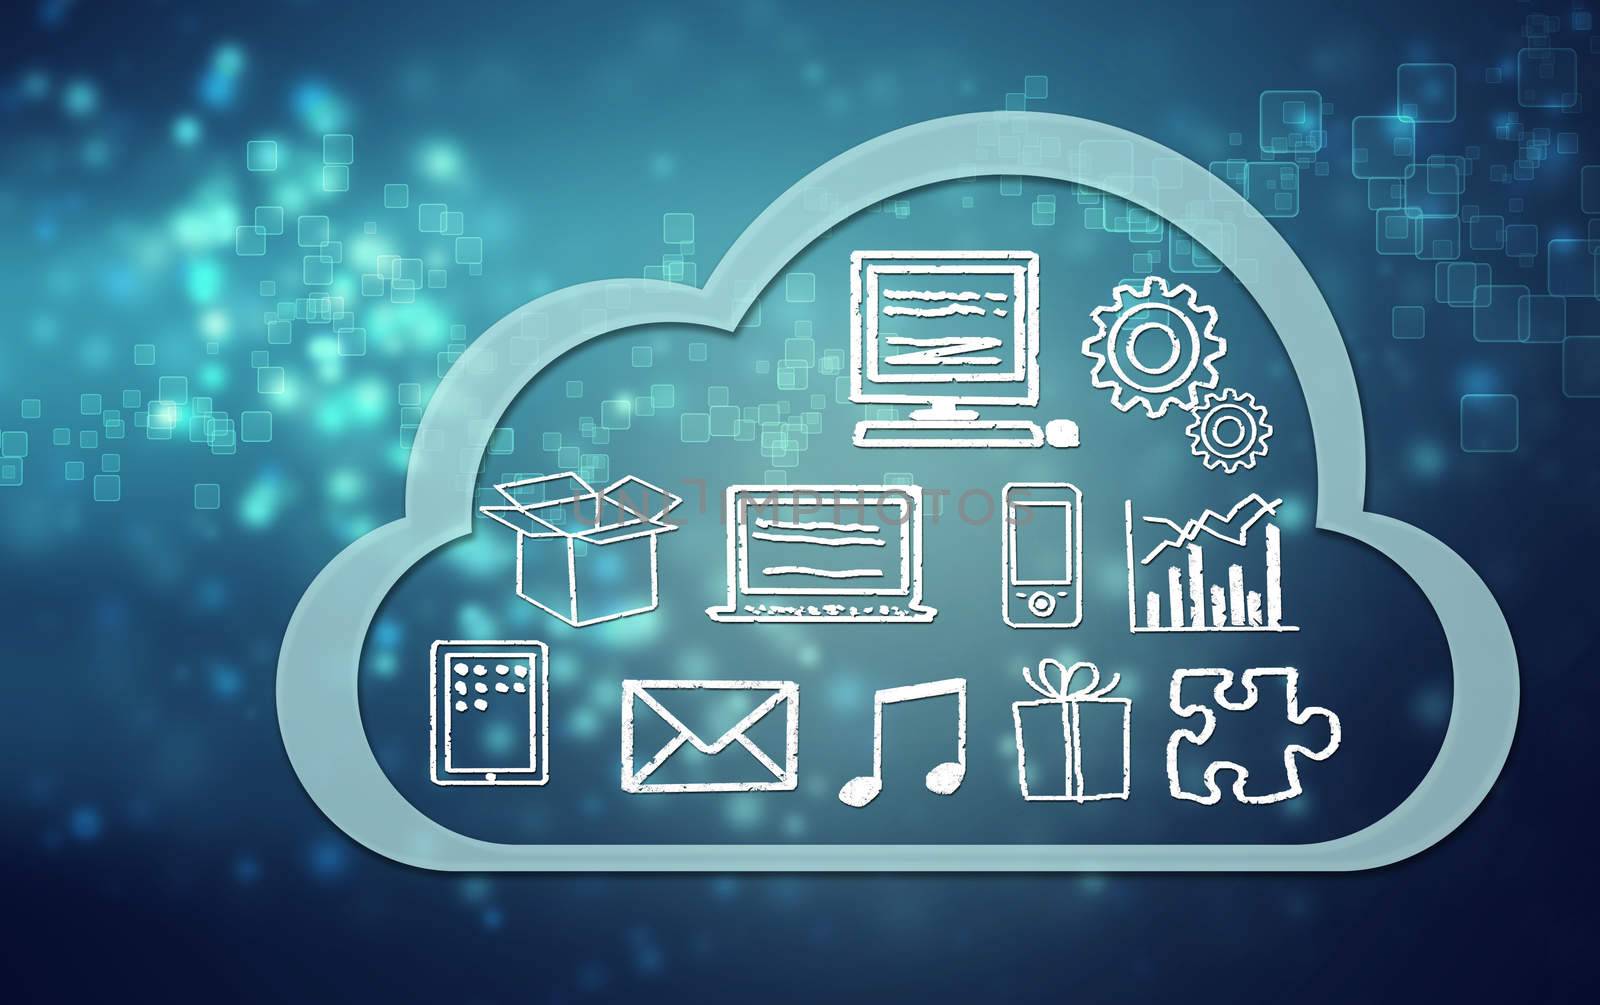 Cloud computing concept icons by melpomene